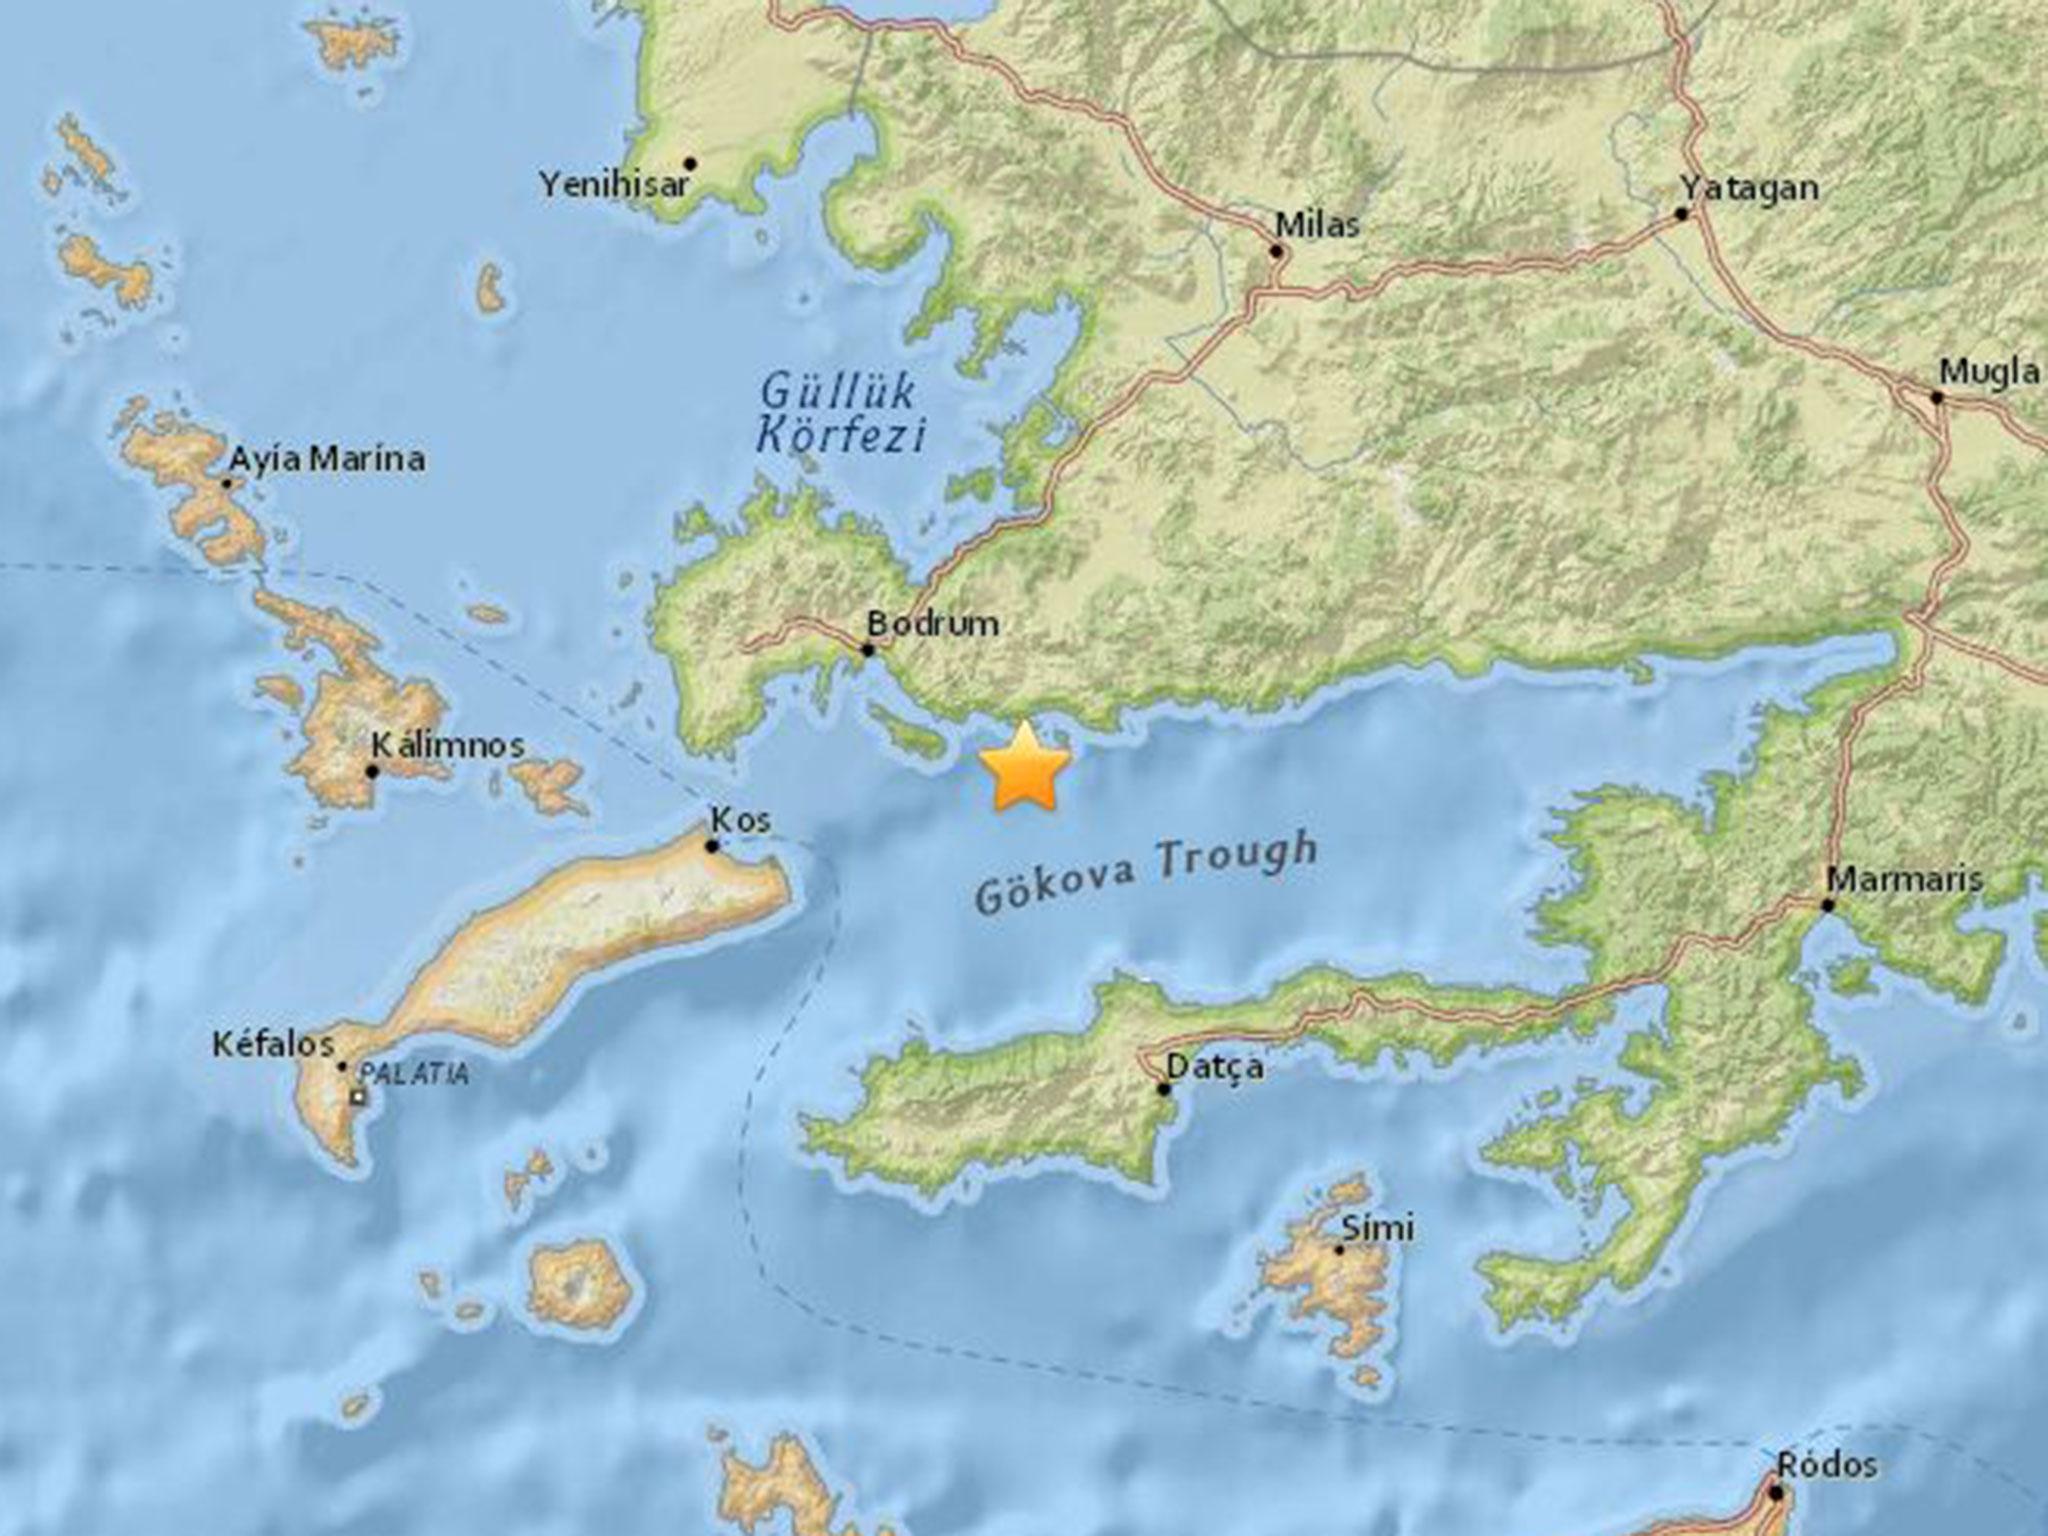 The 5.3 magnitude quake struck 15km (about nine miles) southeast of the Aegean coastal town of Bodrum, at a depth of 10km